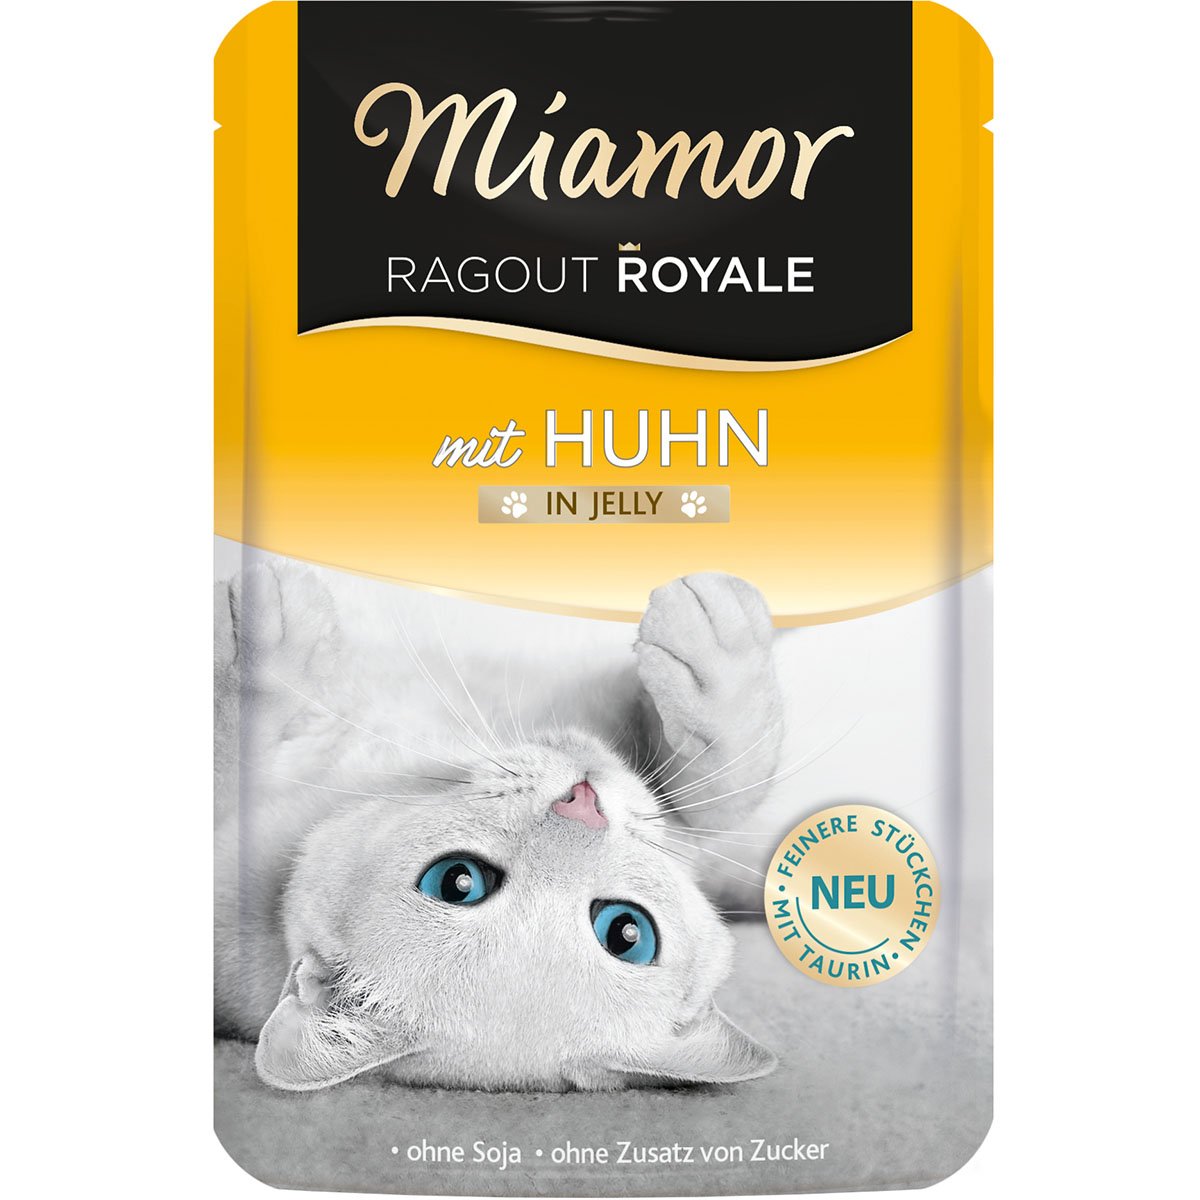 Miamor Ragout Royale Huhn in Jelly 44x100g